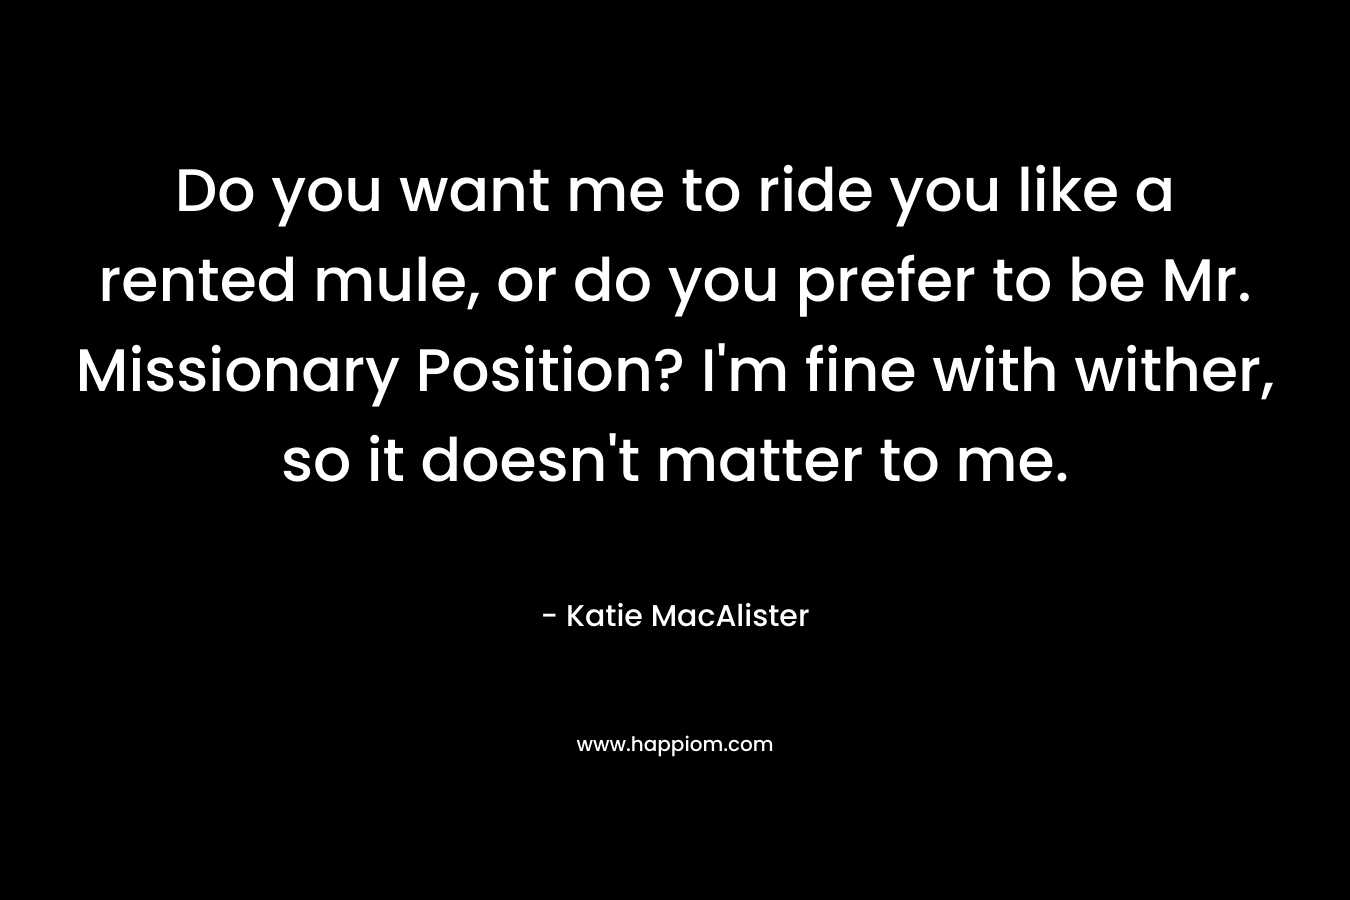 Do you want me to ride you like a rented mule, or do you prefer to be Mr. Missionary Position? I’m fine with wither, so it doesn’t matter to me. – Katie MacAlister